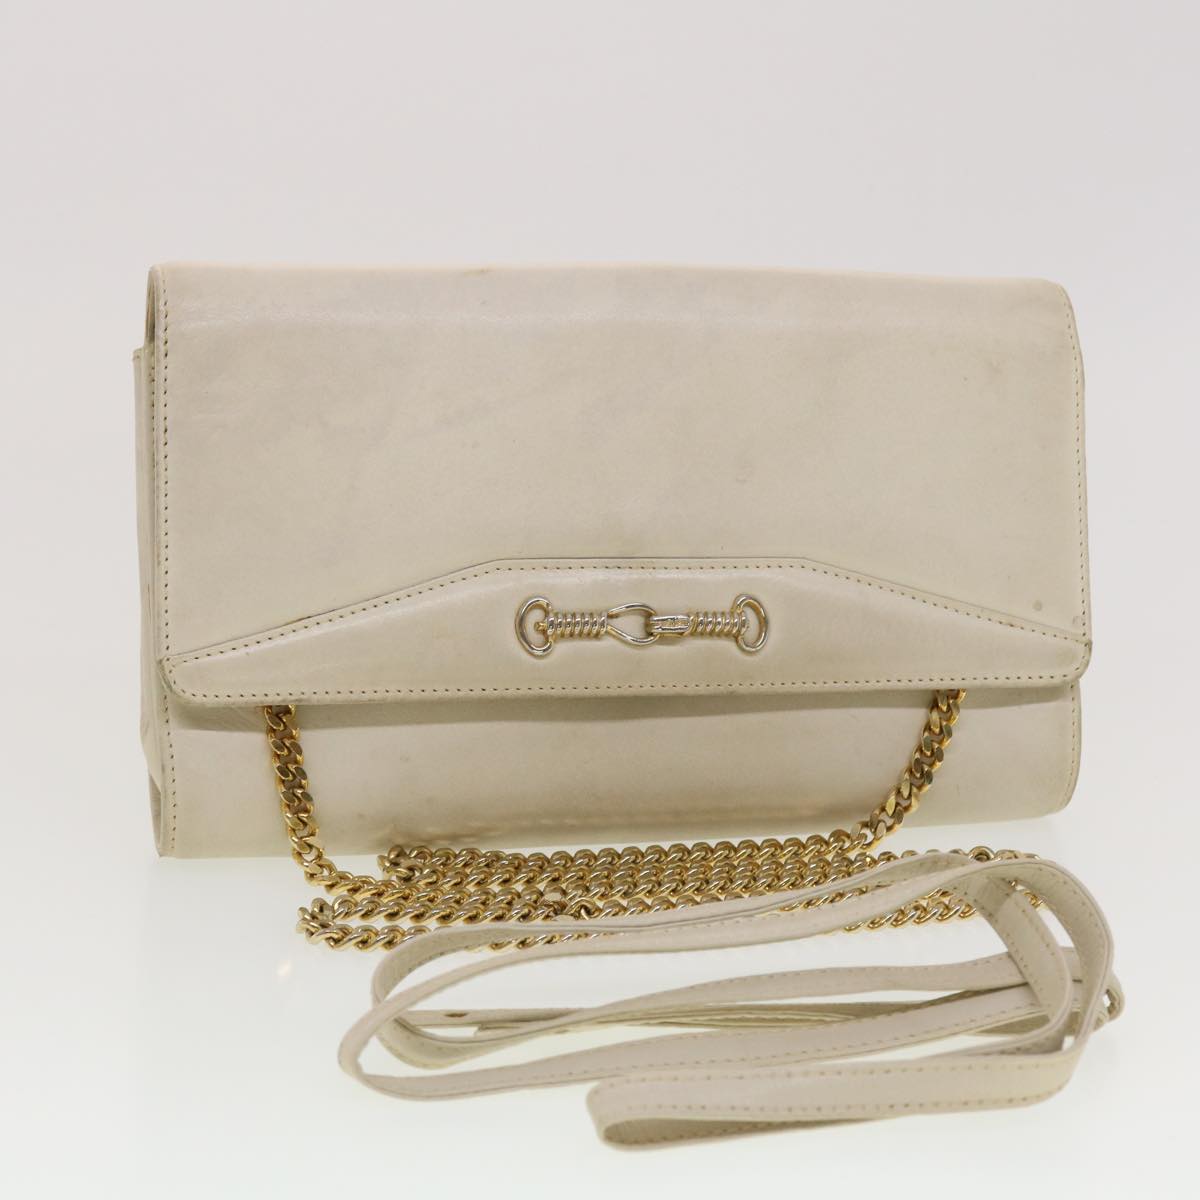 CELINE Shoulder Chain Clutch Bag Leather 2Set Brown White Auth bs5313